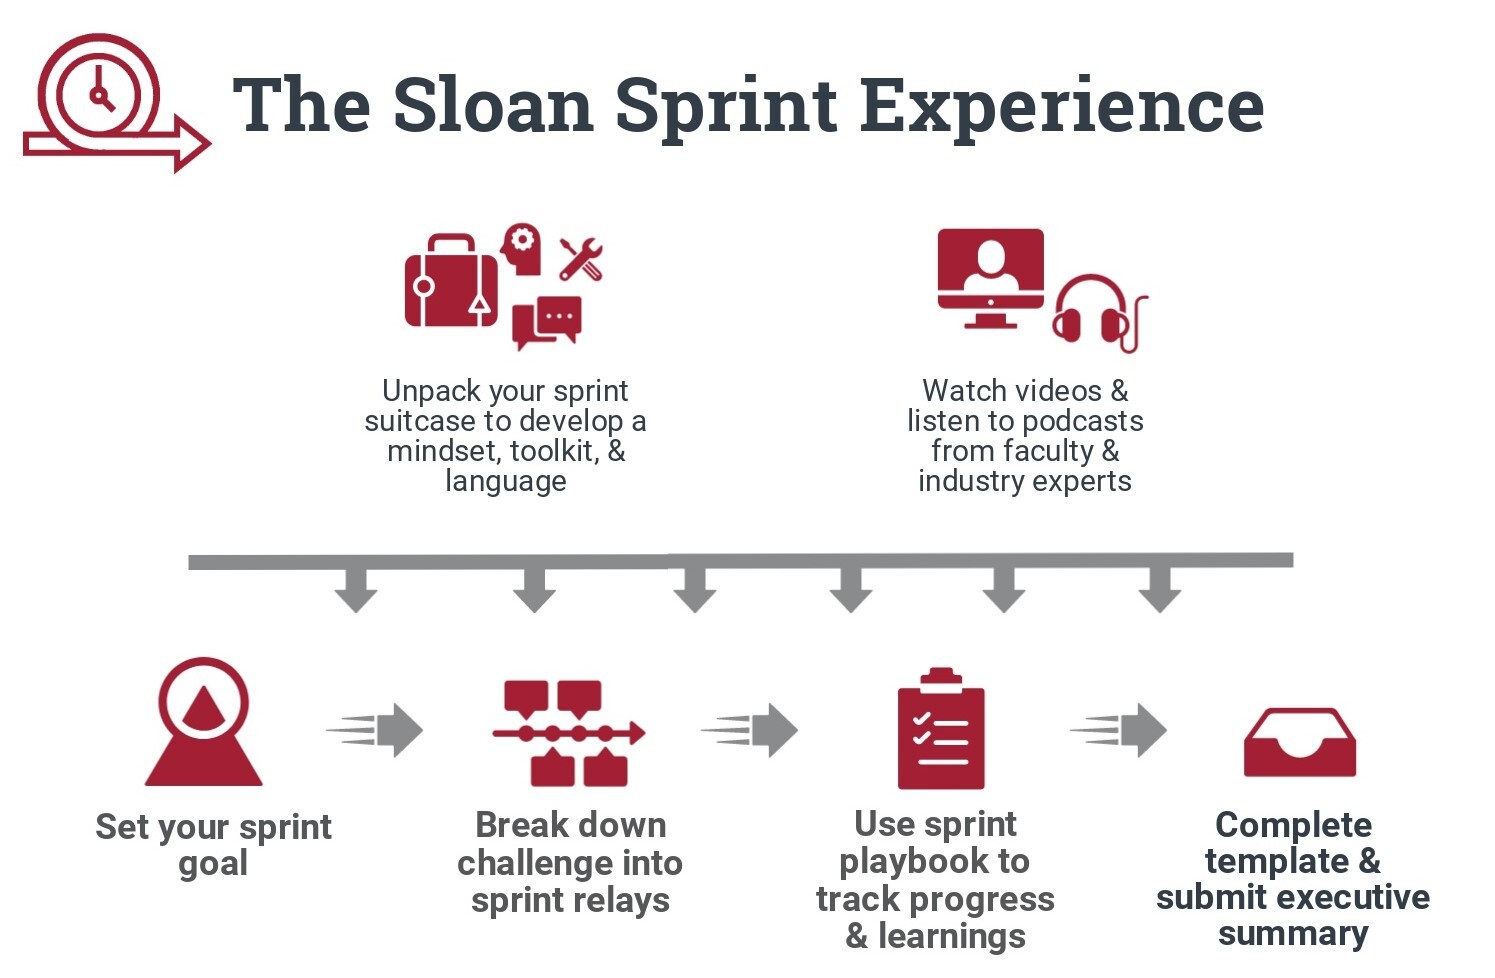 Sprint Experience with MIT Sloan, Unpack your sprint suitcase to develop a mindset, toolkit, & language.  Watch videos & listen to podcasts from faculty & industry experts.  Set your sprint goal.  Break down challenge into sprint relays.  Use sprint playbook to track progress & learnings.  Complete template & submit executive summary.